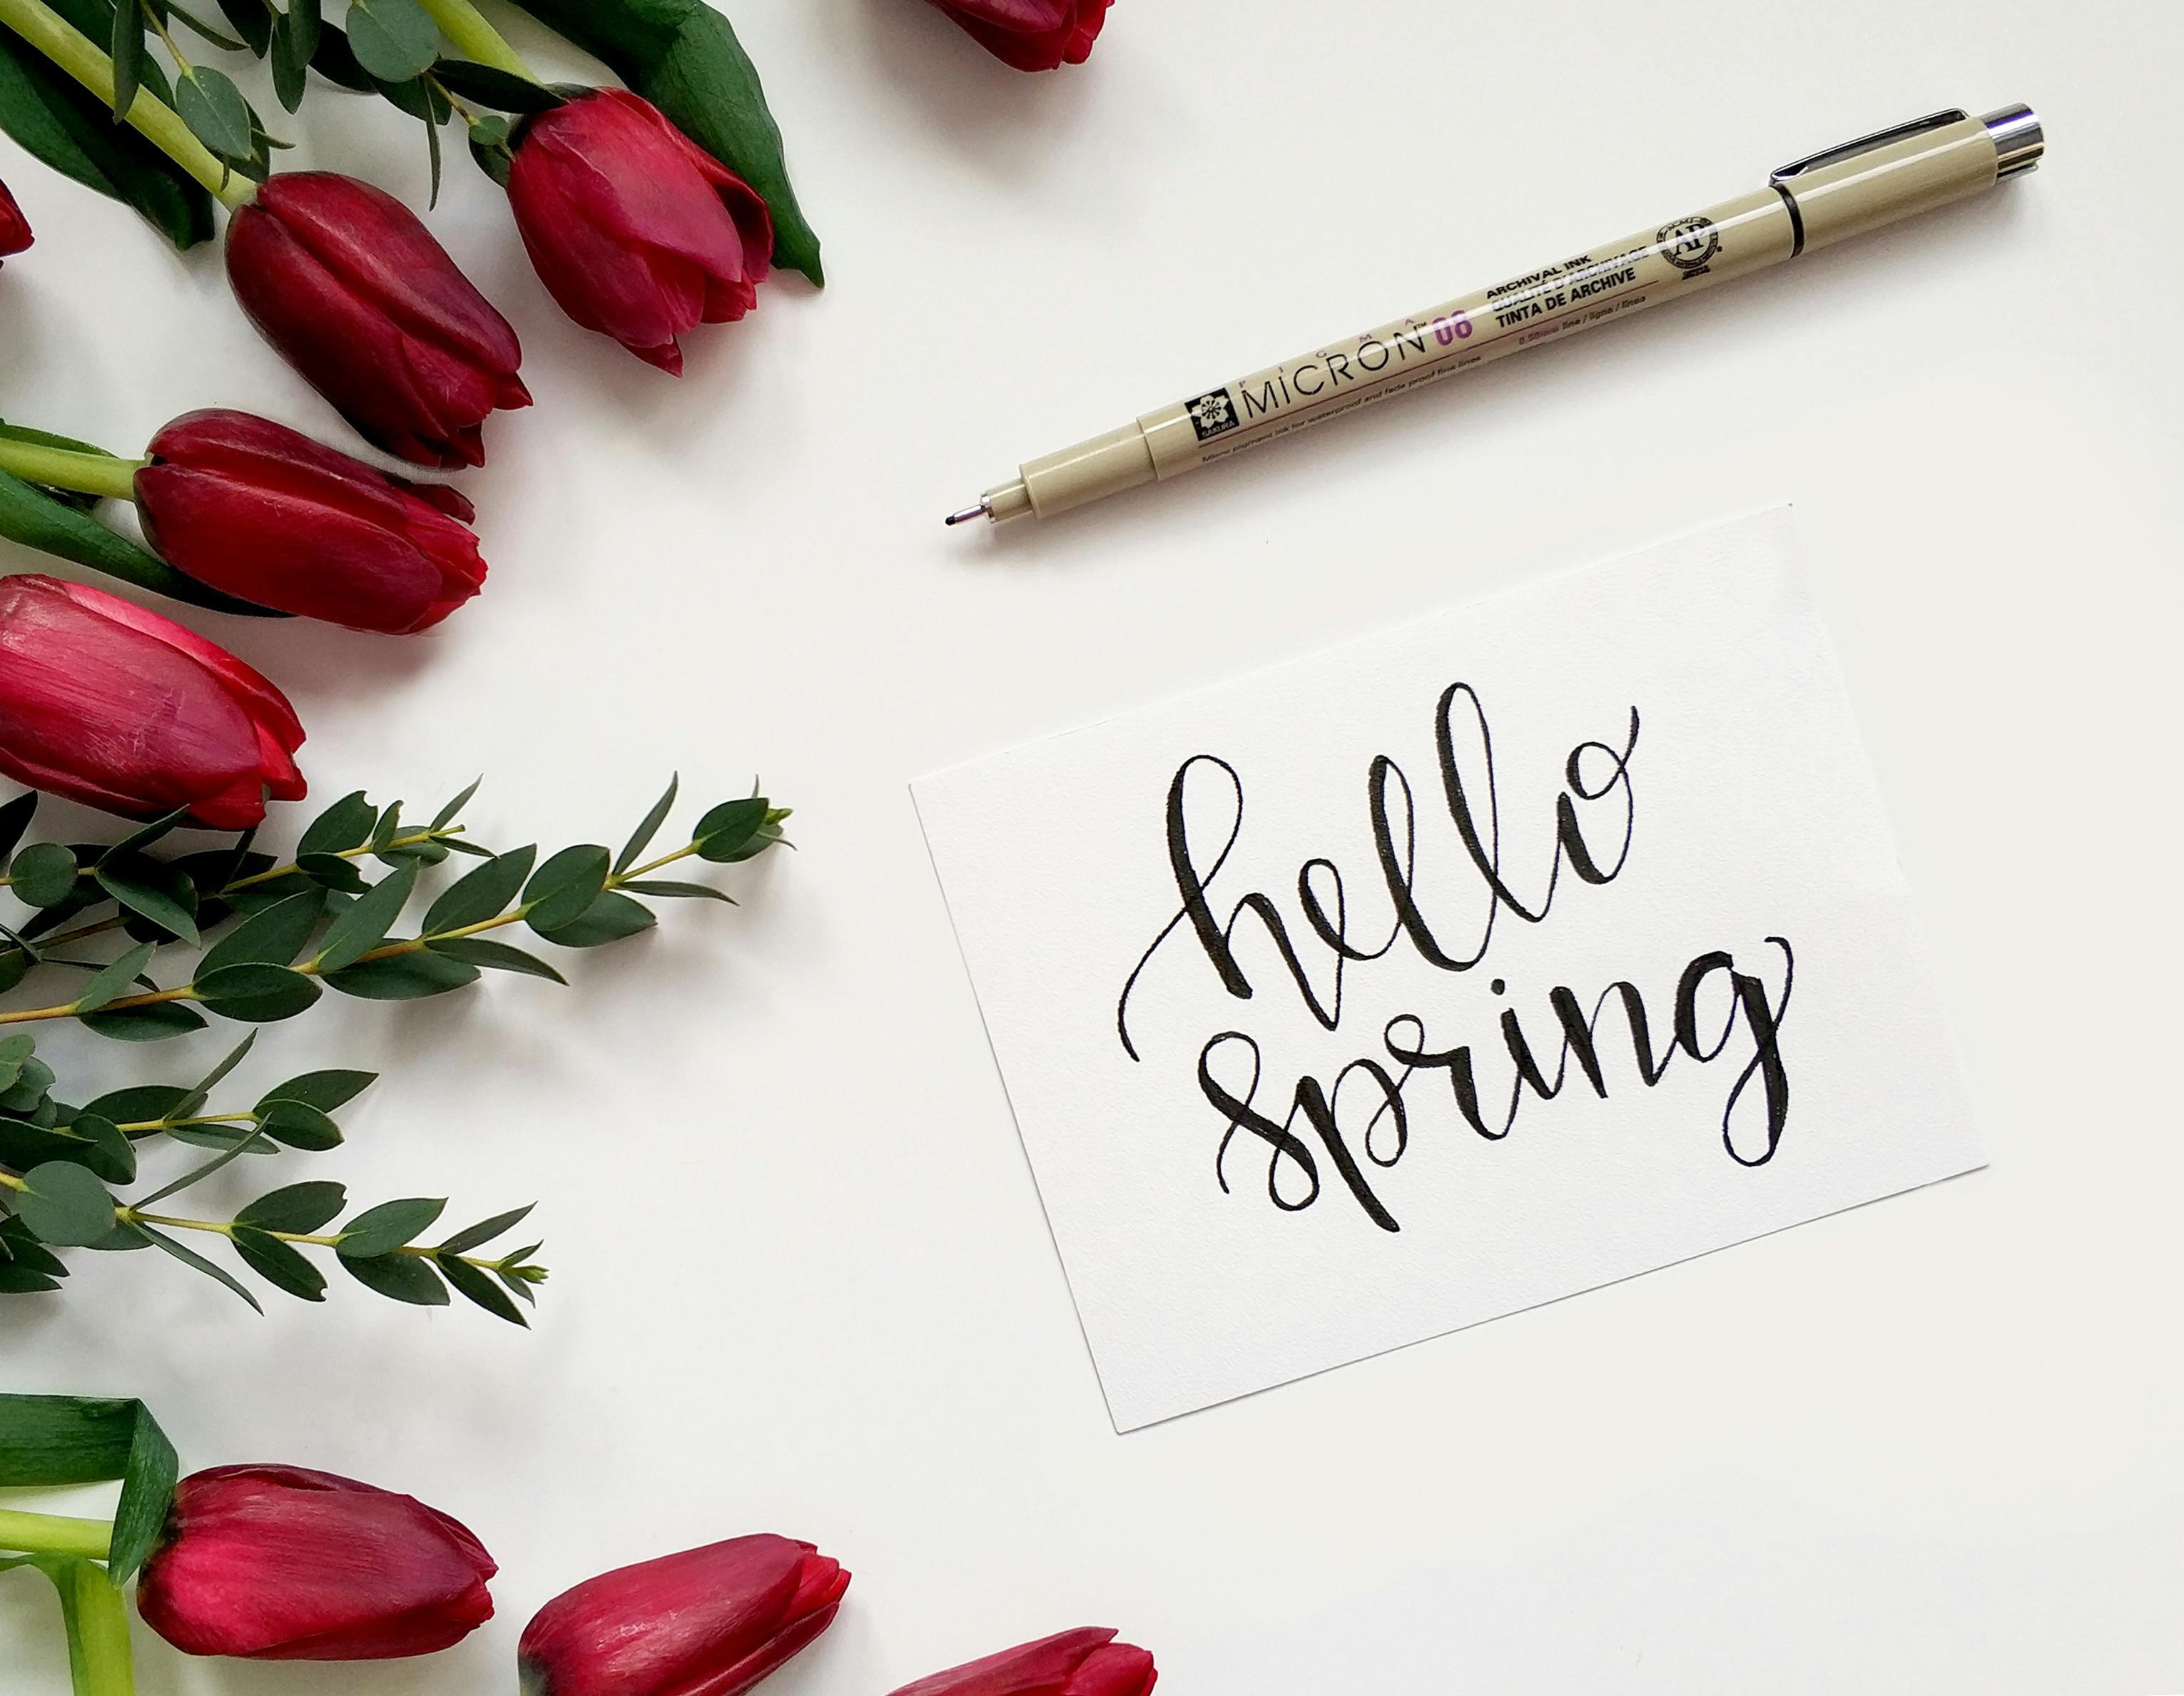 A picture of a postcard titled "hello spring" in cursive, with red roses surrounding the postcard